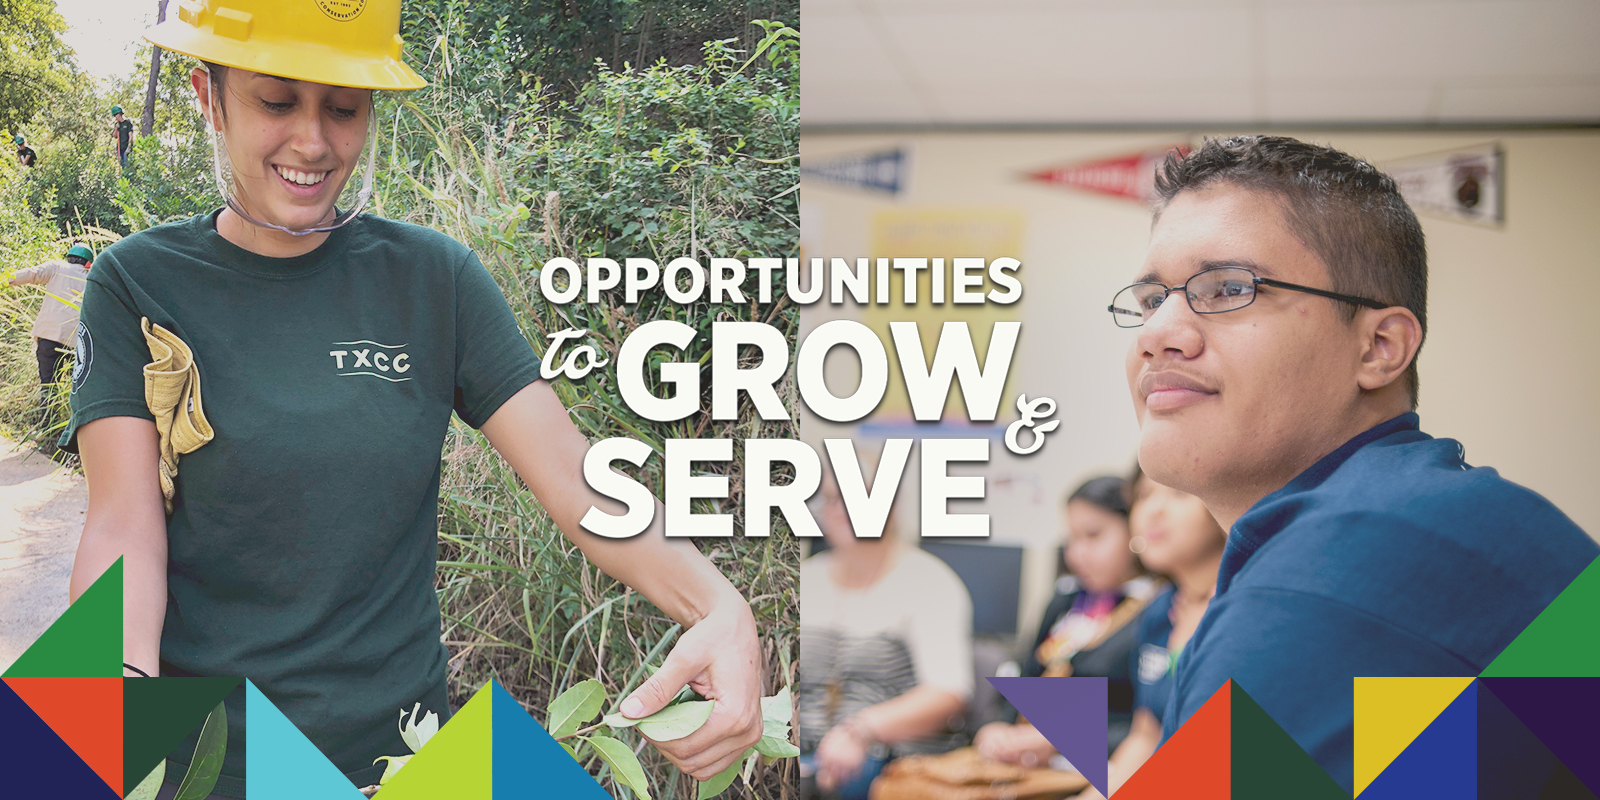 Opportunities to grow & serve through education, on the job training, and service to others.